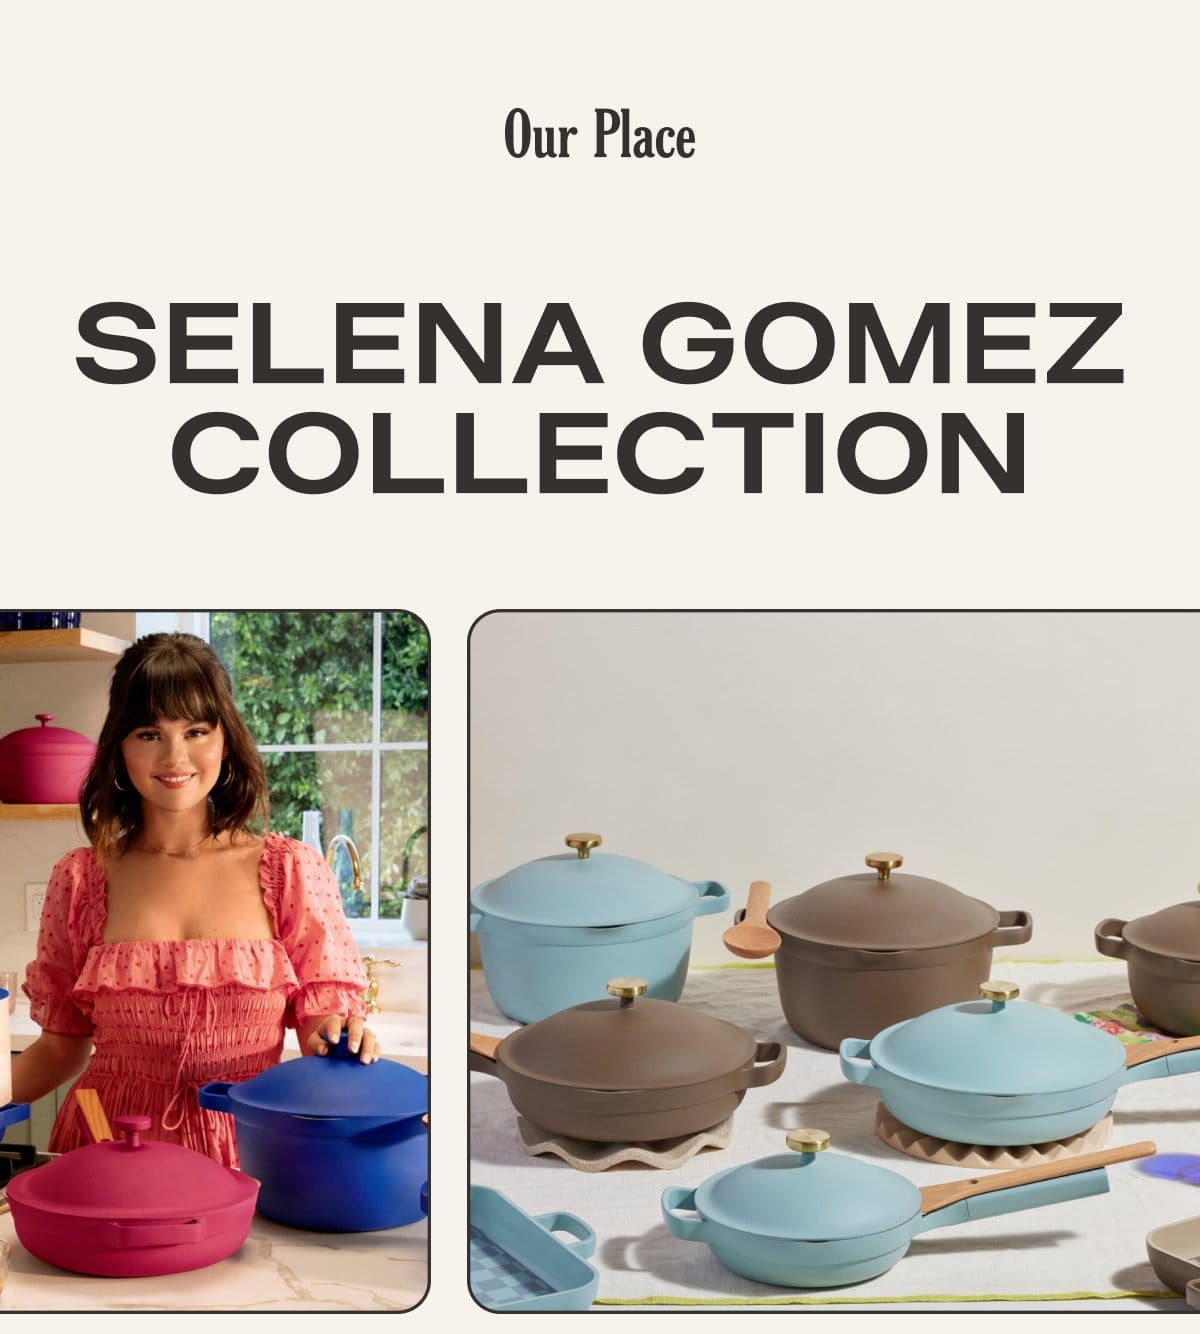 Our Place - Selena Gomez Collection